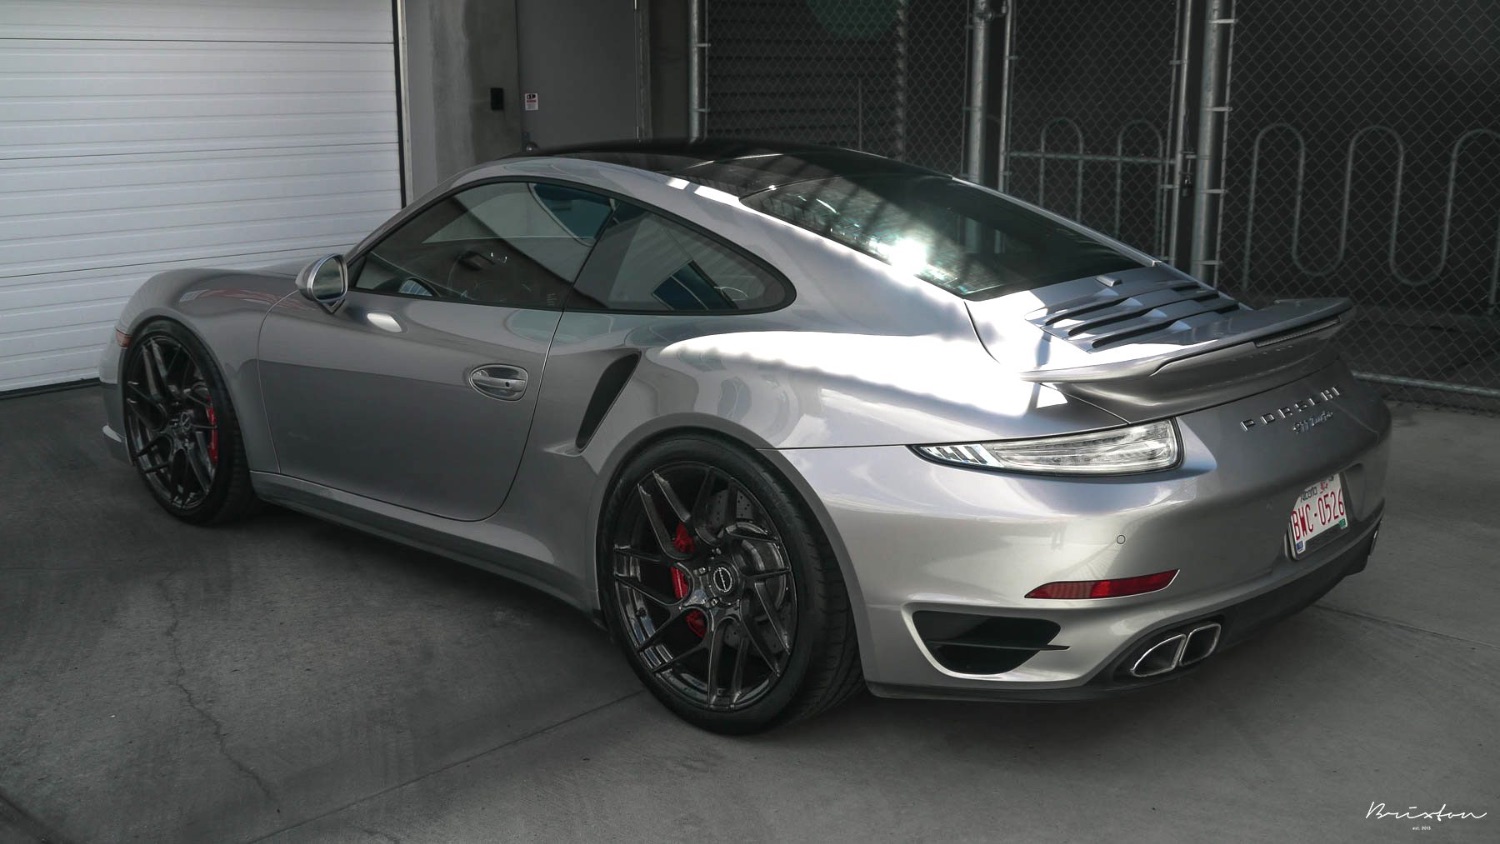 brixton-forged-silver-porsche-991-turbo-s-brixton-forged-cm7-ultrasport-1-piece-concave-forged-wheels-brushed-smoke-black-5-1800x1013